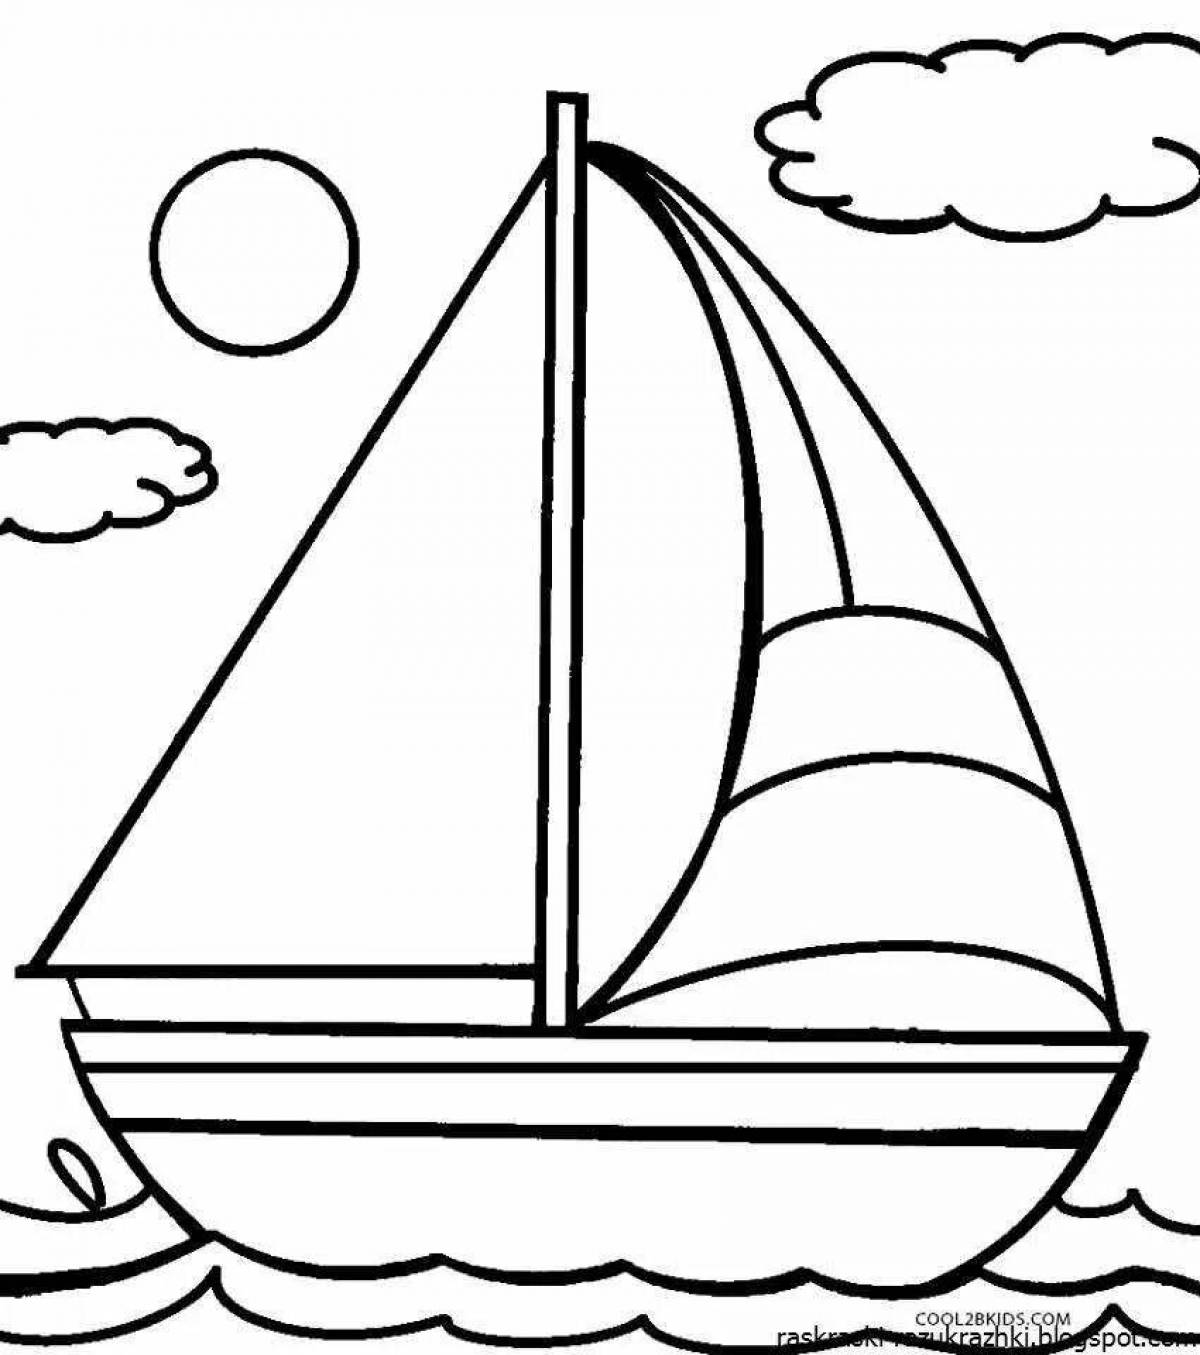 Creative boat coloring book for 5-6 year olds